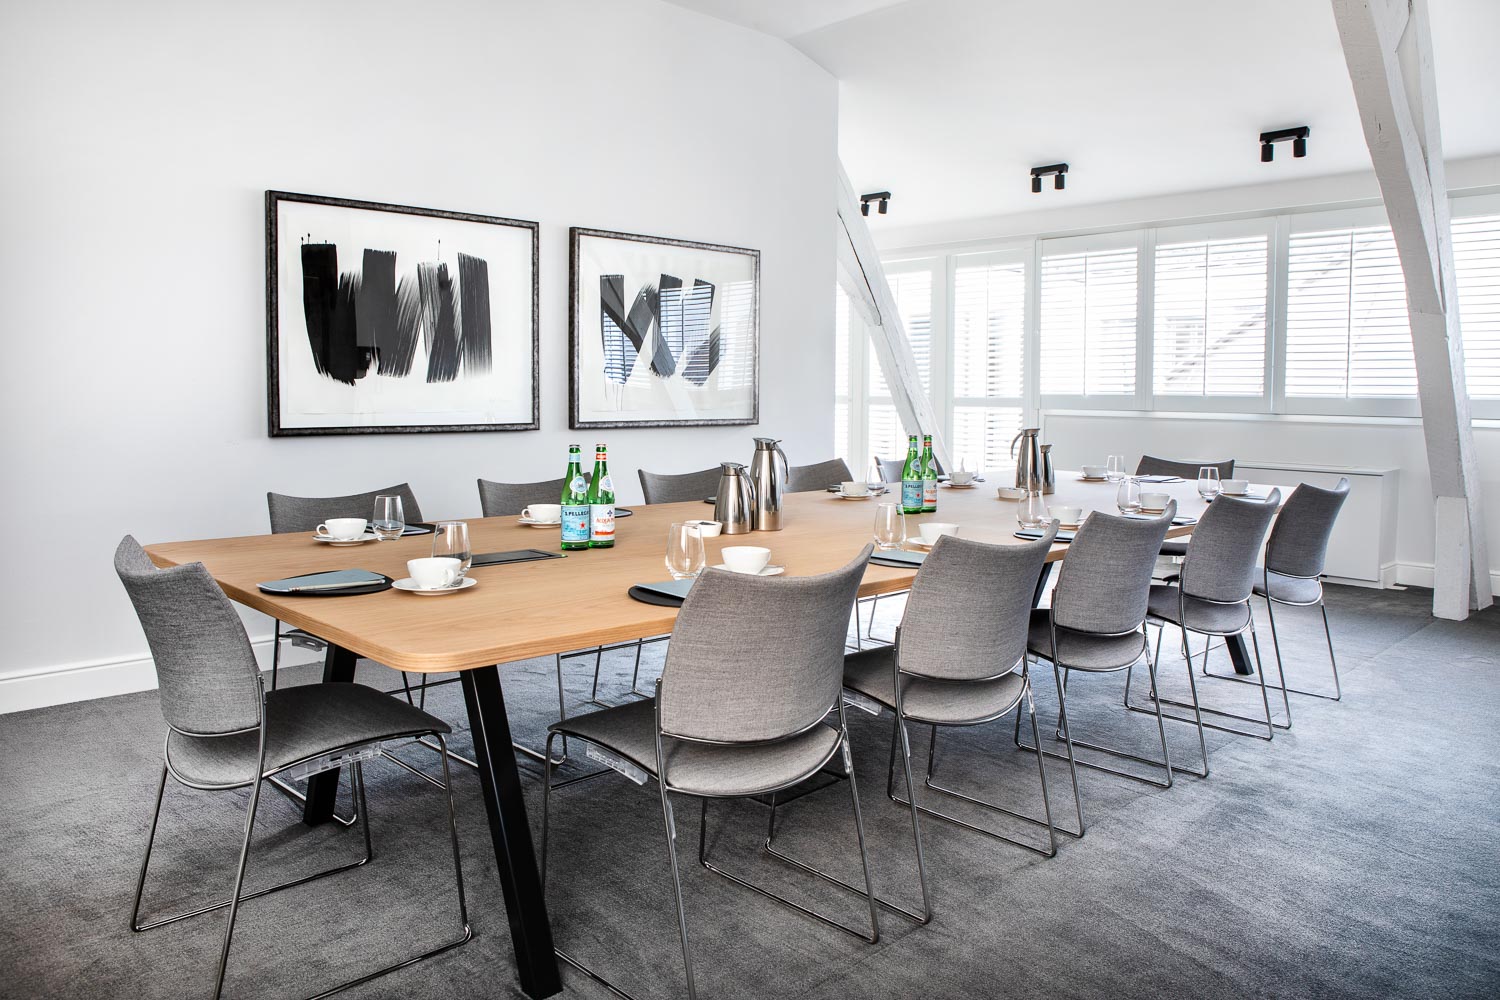 A meeting room with grey chairs and a large table